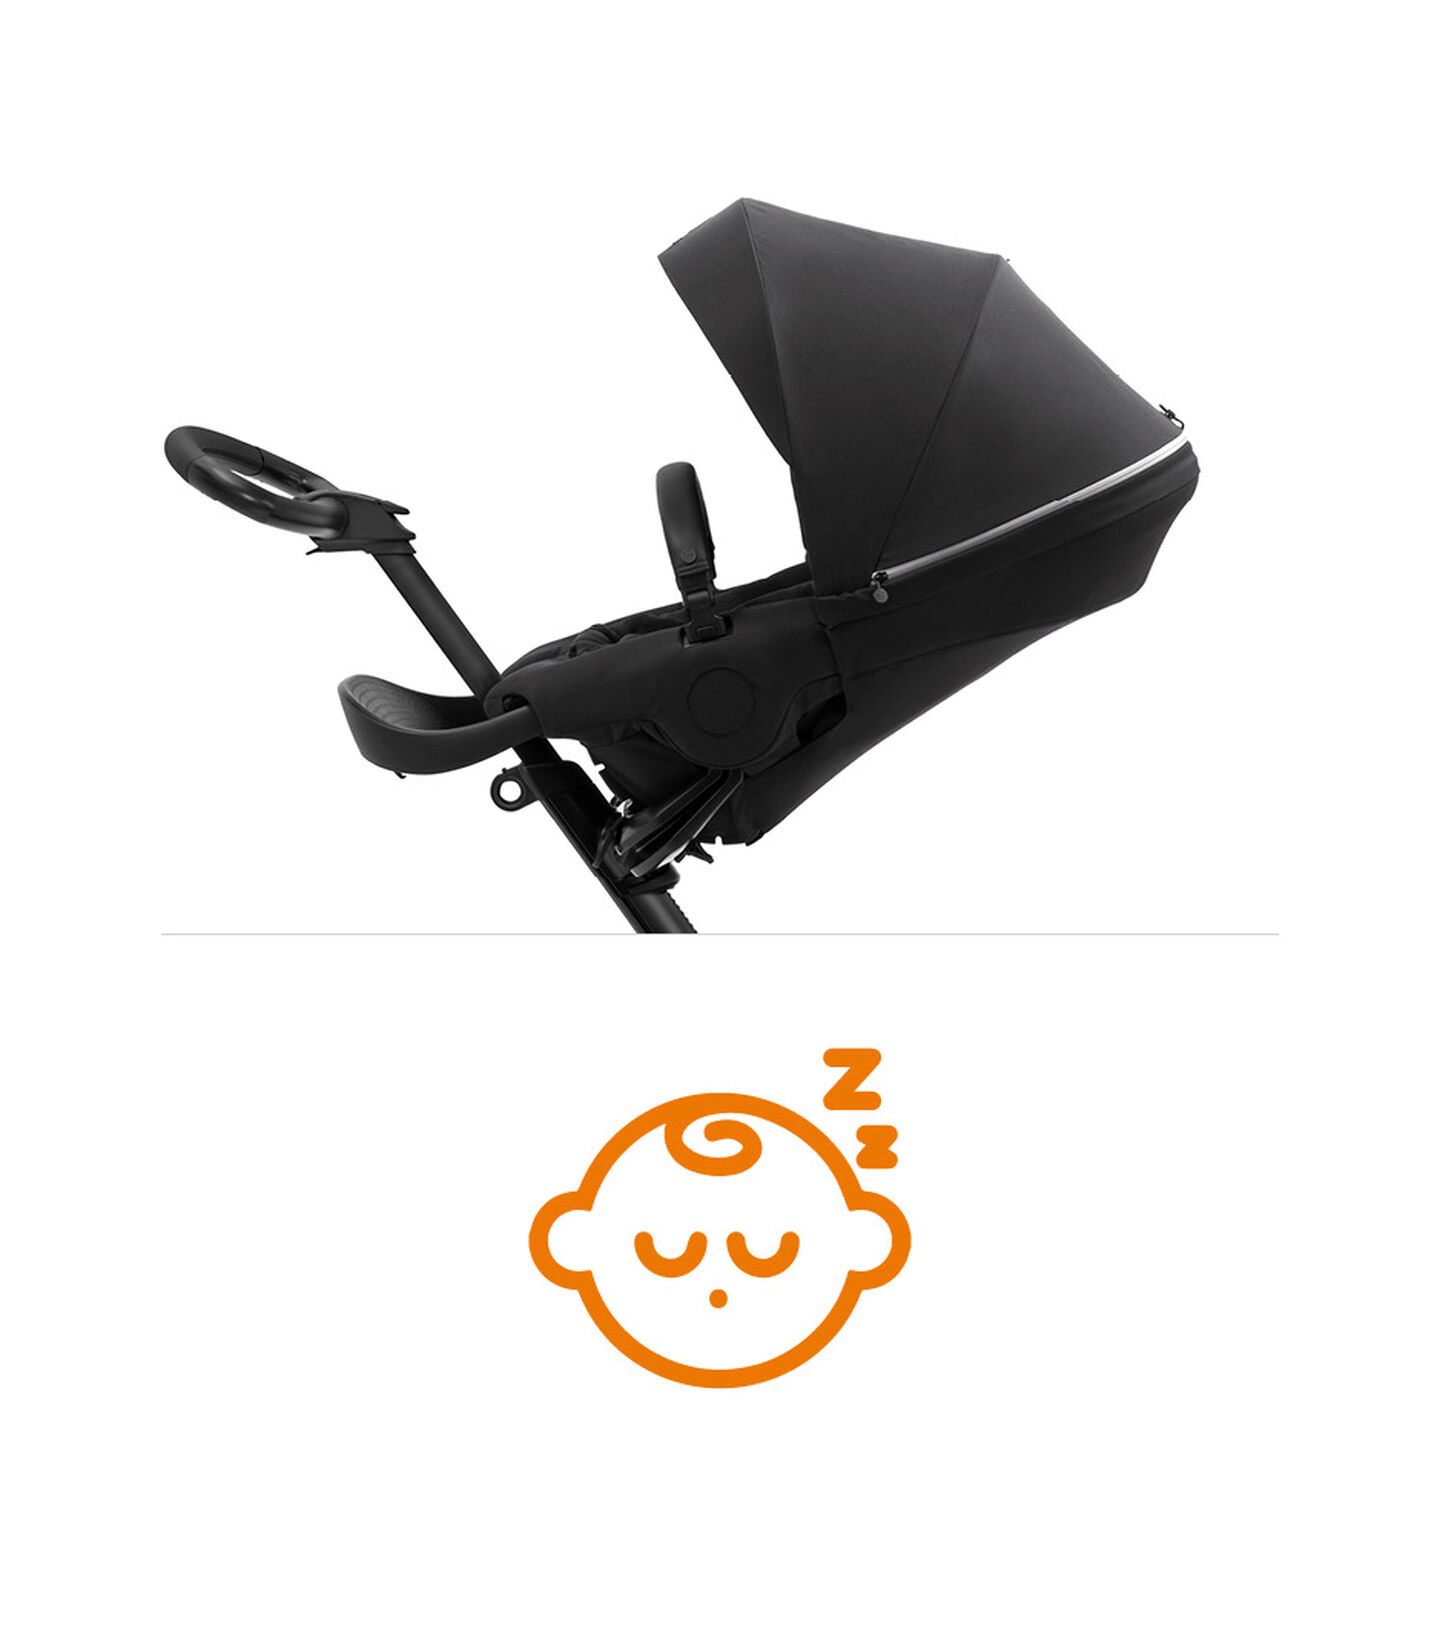 Stokke® Xplory® X Rich Black Stroller with Seat Parent Facing, sleep position.   view 7